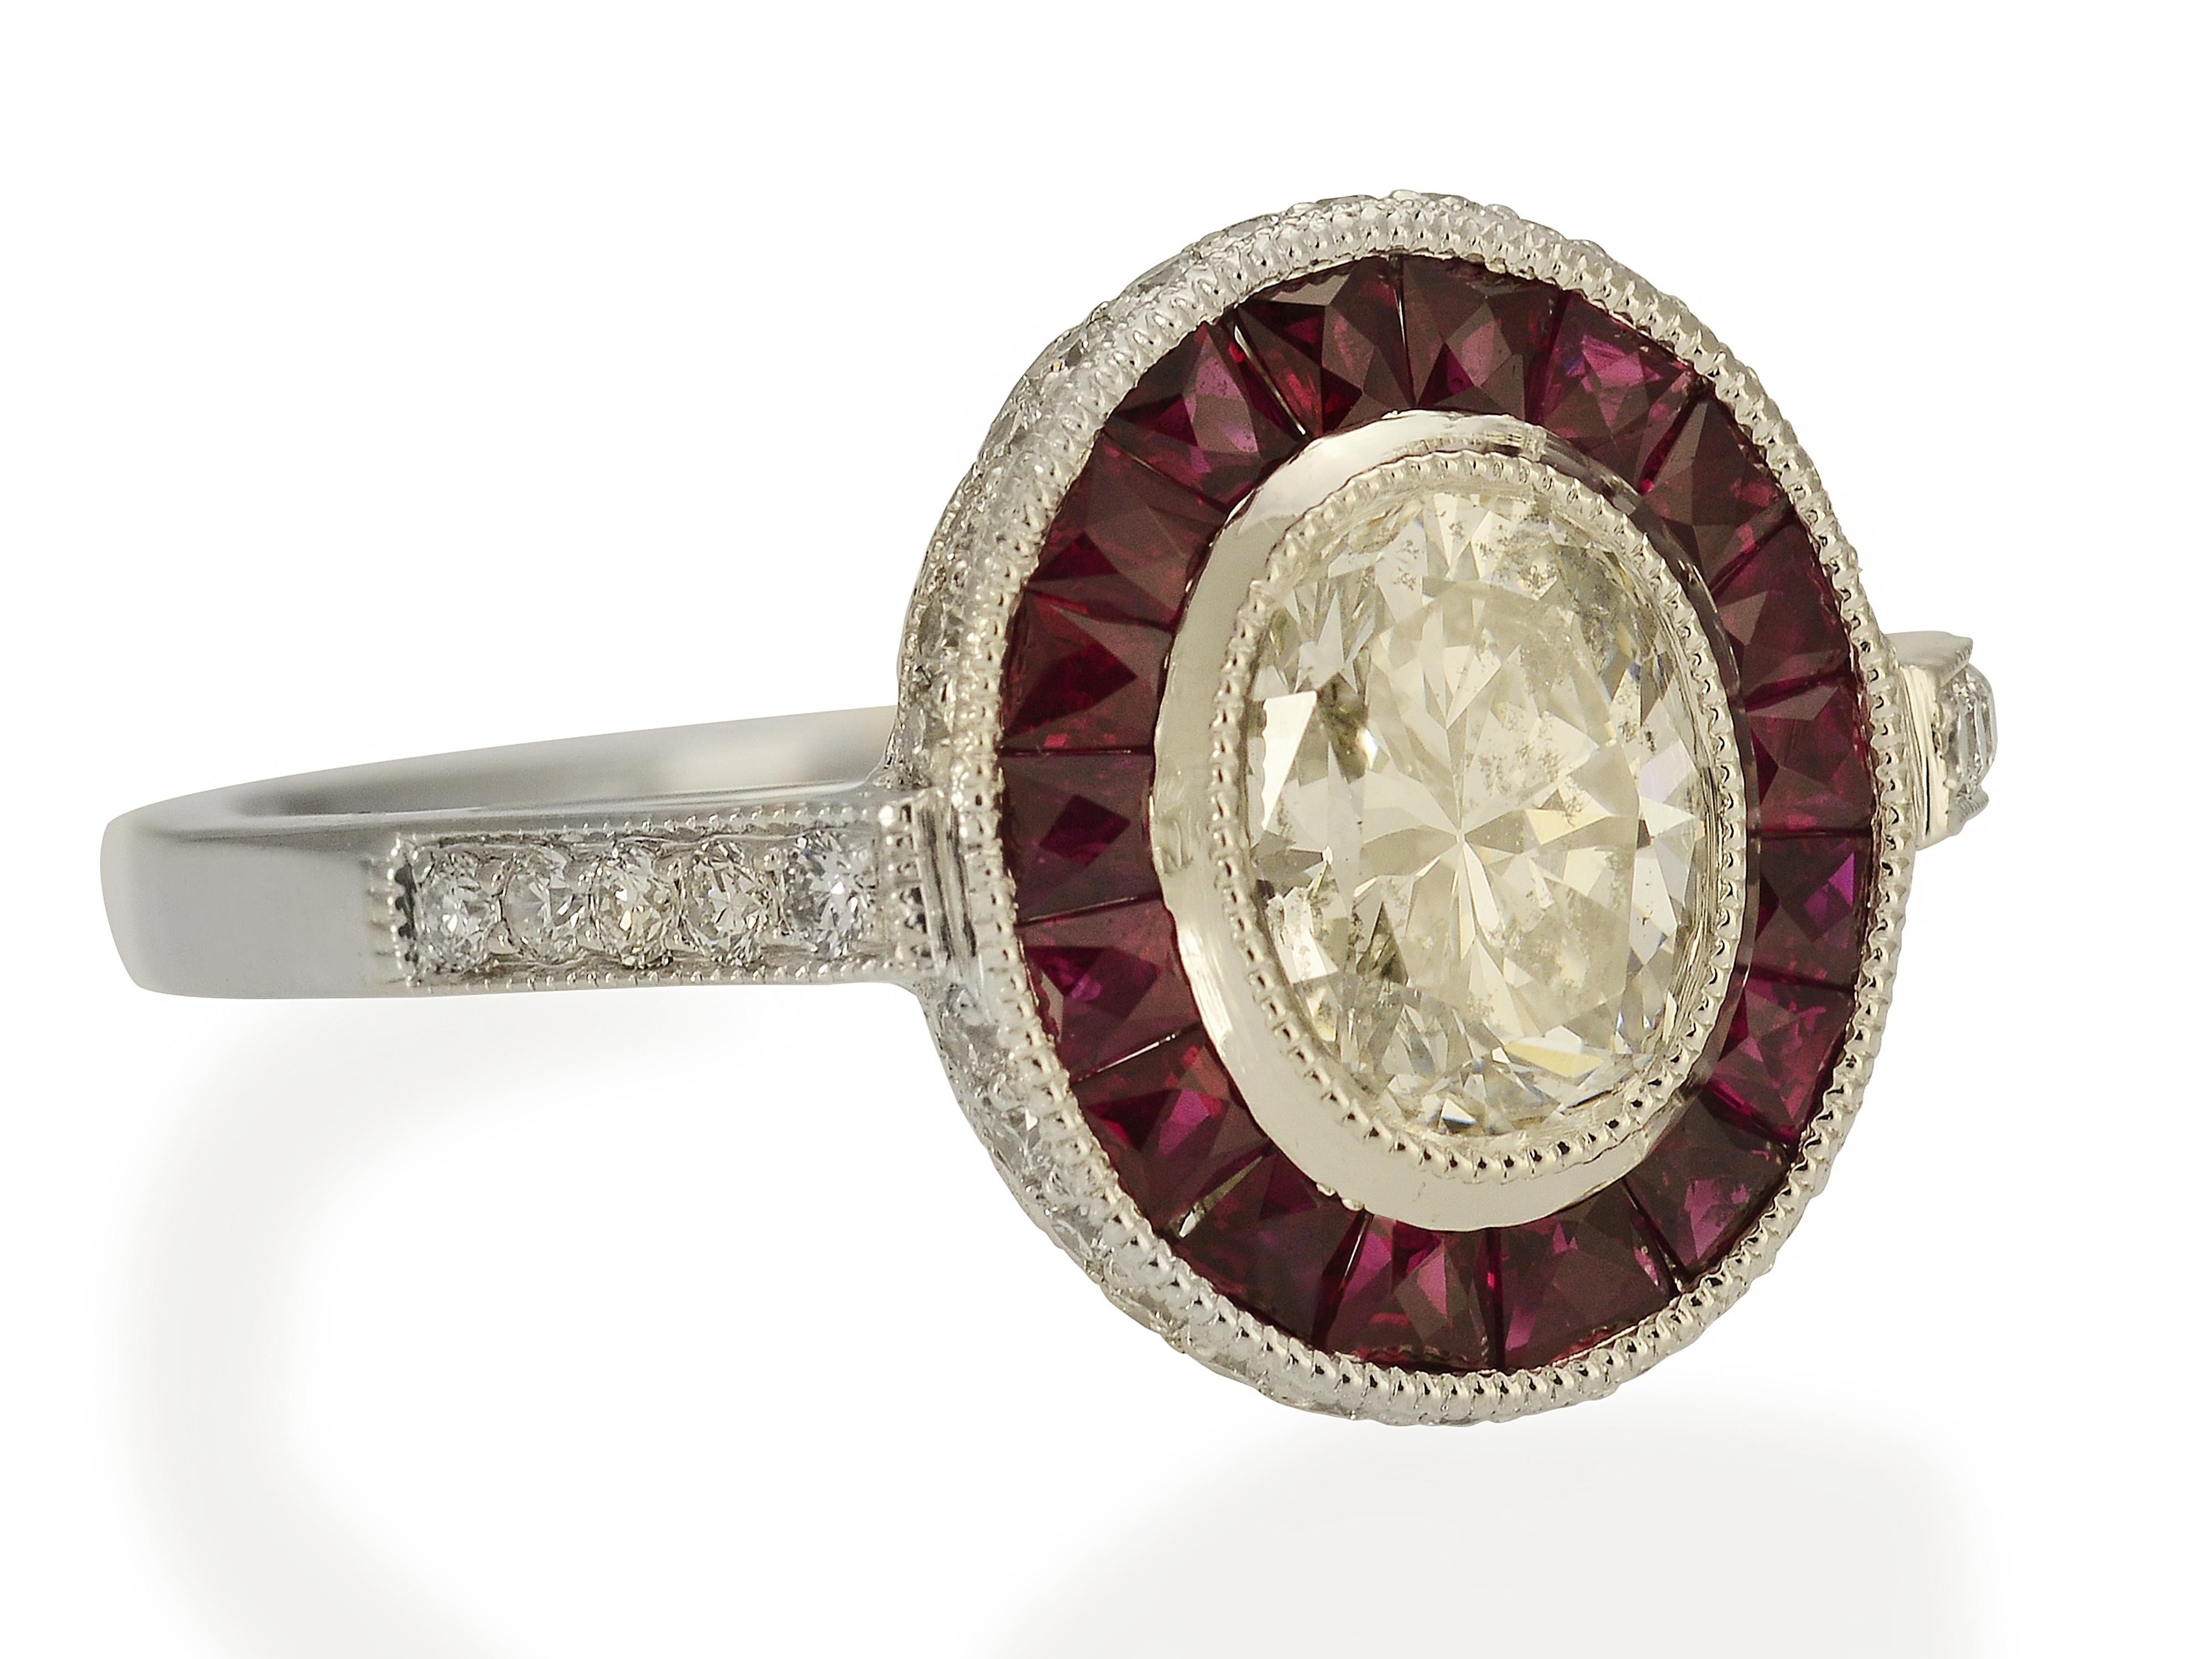 This art deco inspired ring is handmade in platinum. It features a bezel-set 0.77 carat Oval diamond of H color and SI2 clarity in the center. Surrounding the diamond are 18 caliber cut rubies totaling 0.53 carats. An additional 0.22 carats of round